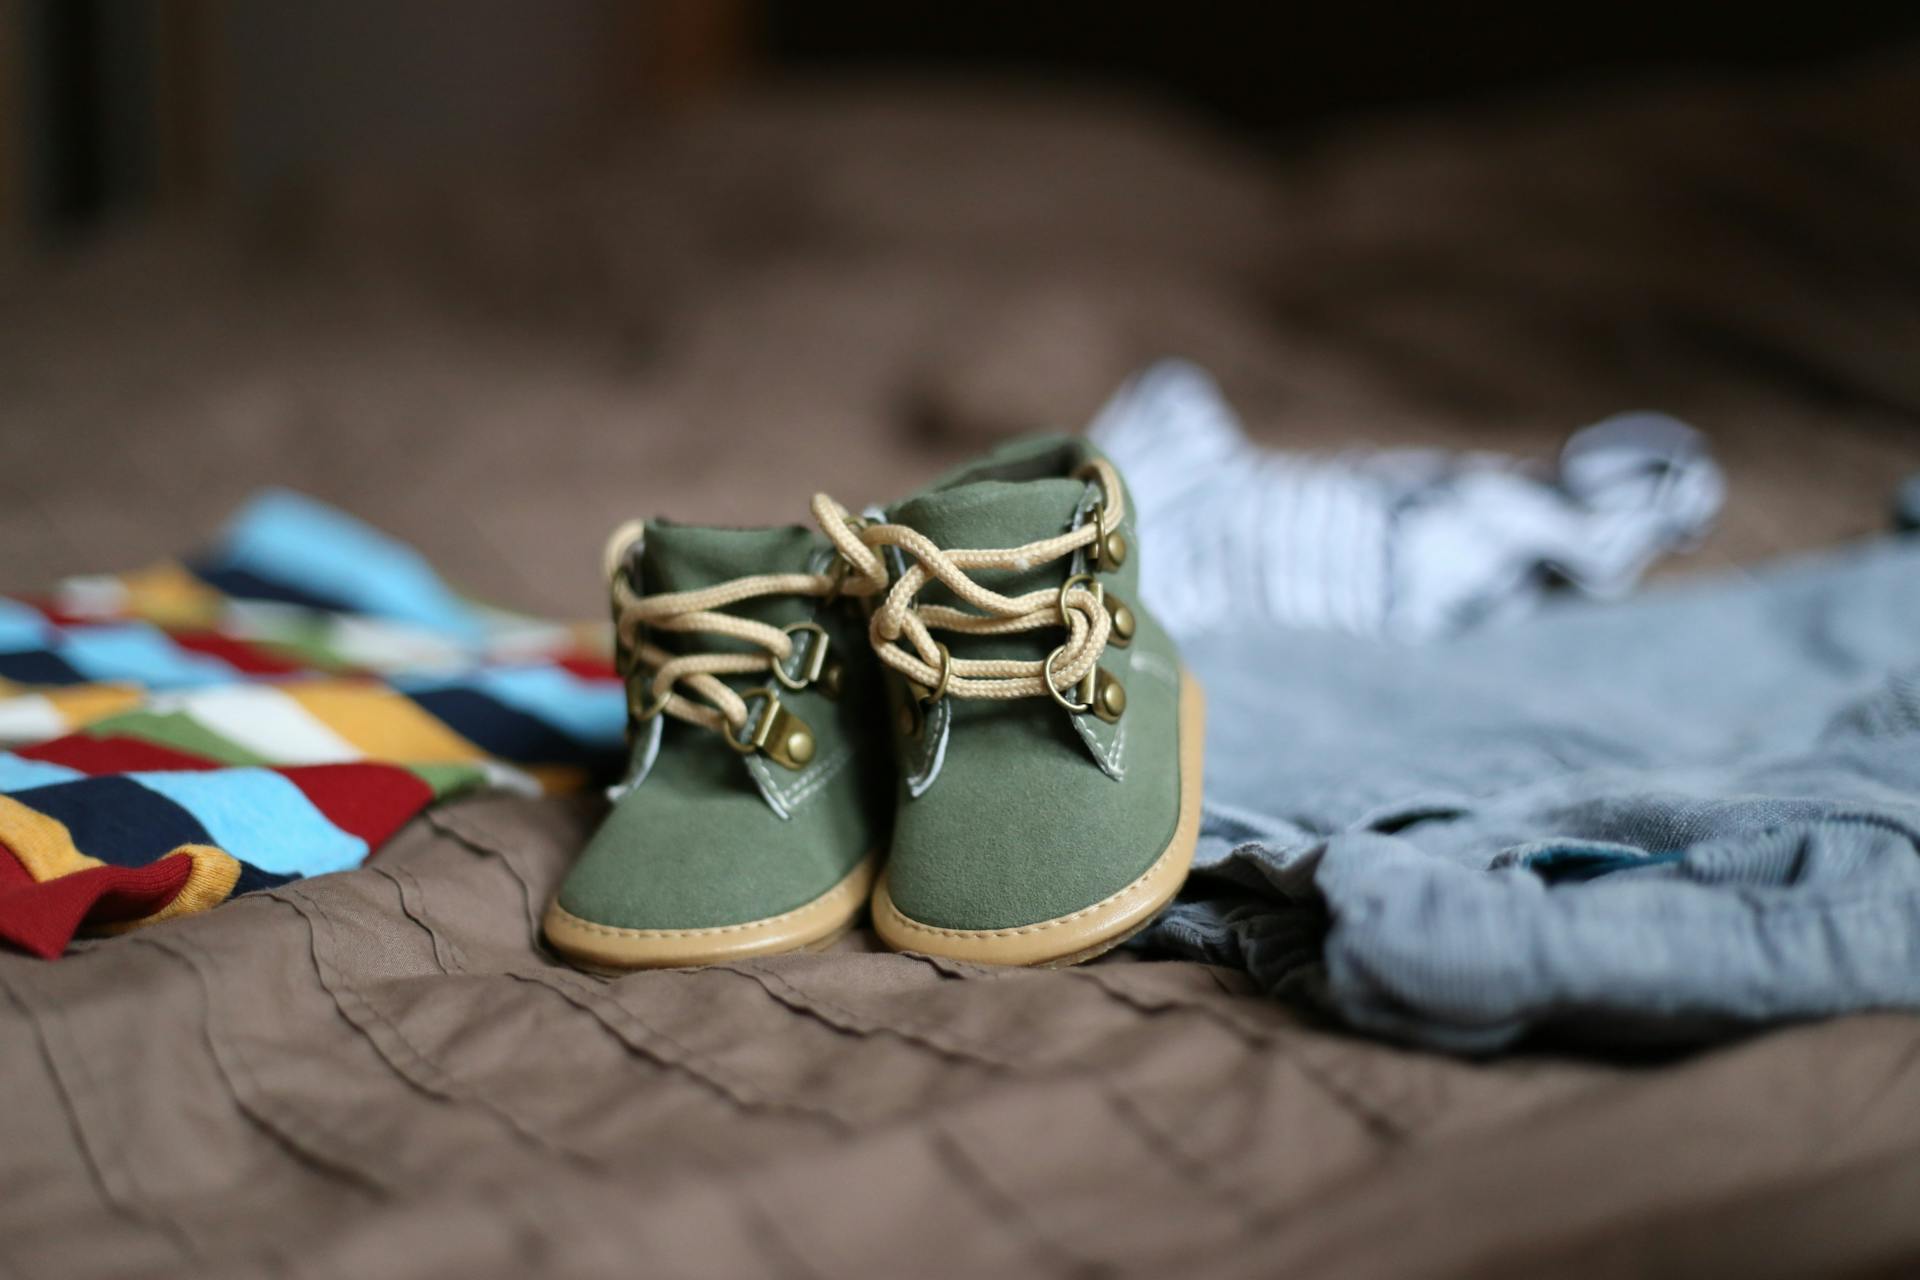 3 Ways in Which Toddler Shoes Can Give Your Little One the Confidence They Need To Walk